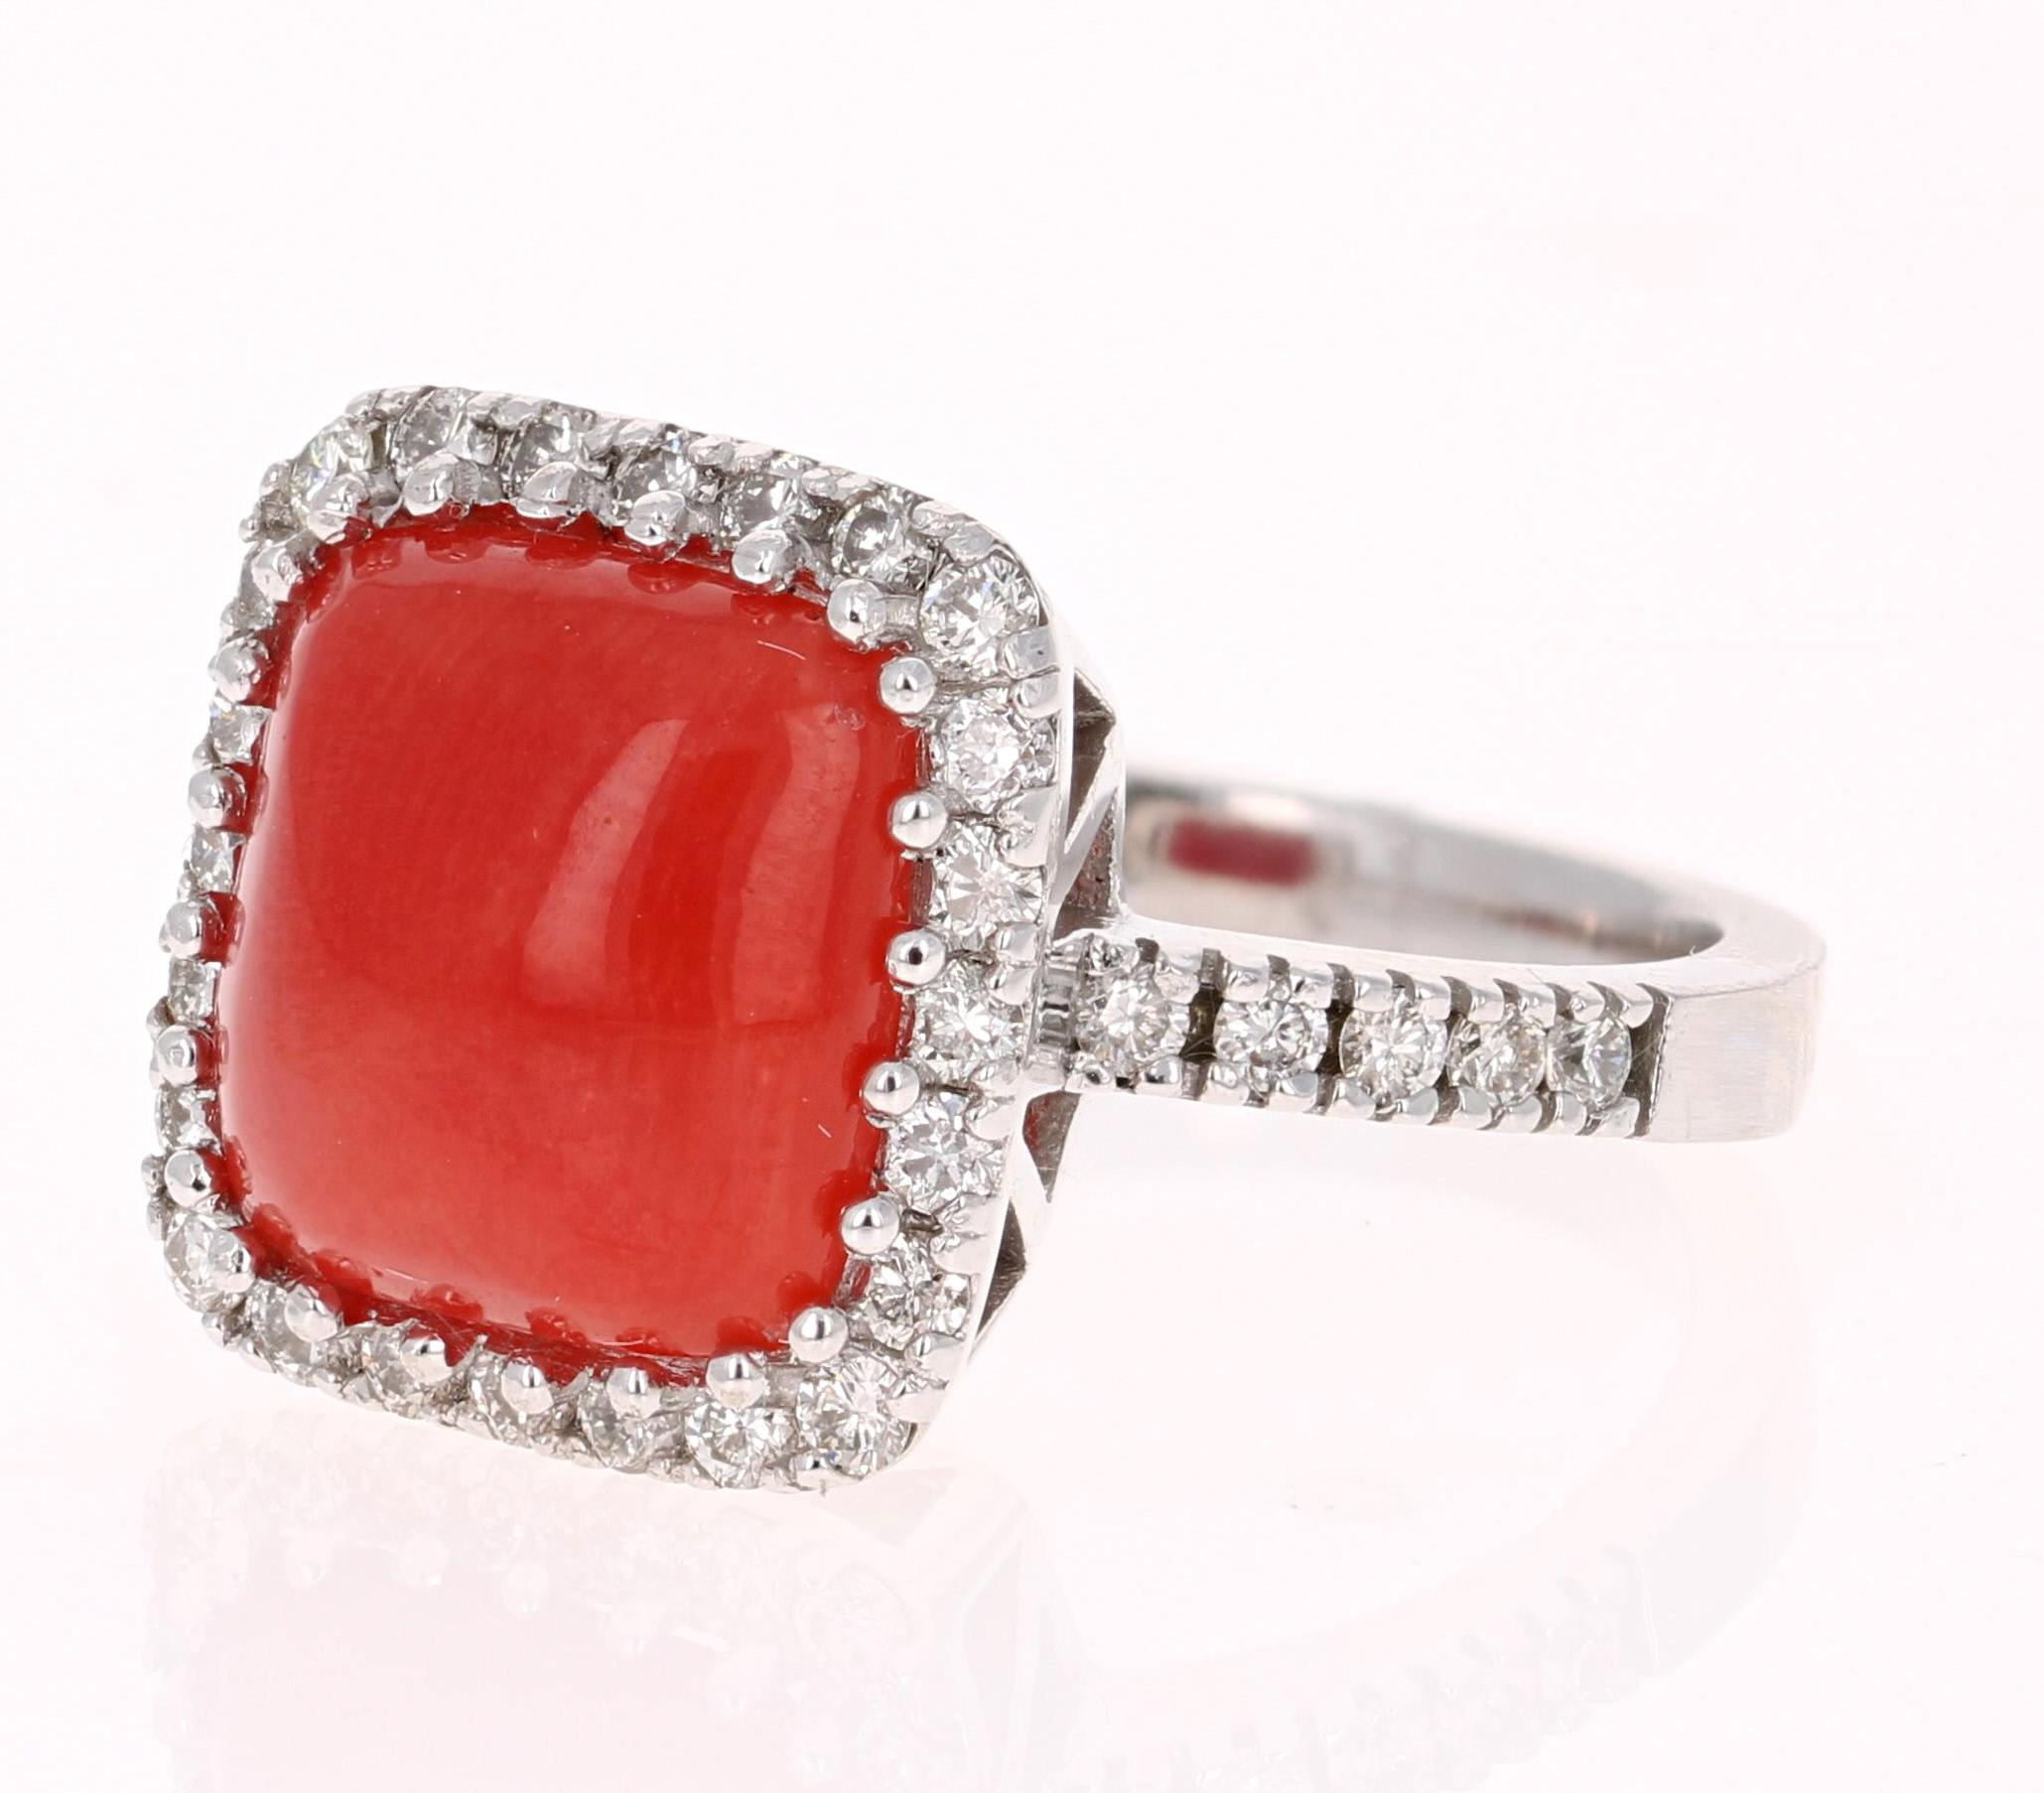 This exquisite Coral Ring is sure to be a stopper at any occasion! The Coral weighs 4.20  Carats and is adorned by 34 Round Cut White Diamonds weighing 0.73 Carats (Clairyt: VS2, Color: H)  The Total Carat Weight of this beauty is 4.93 Carats. 
It